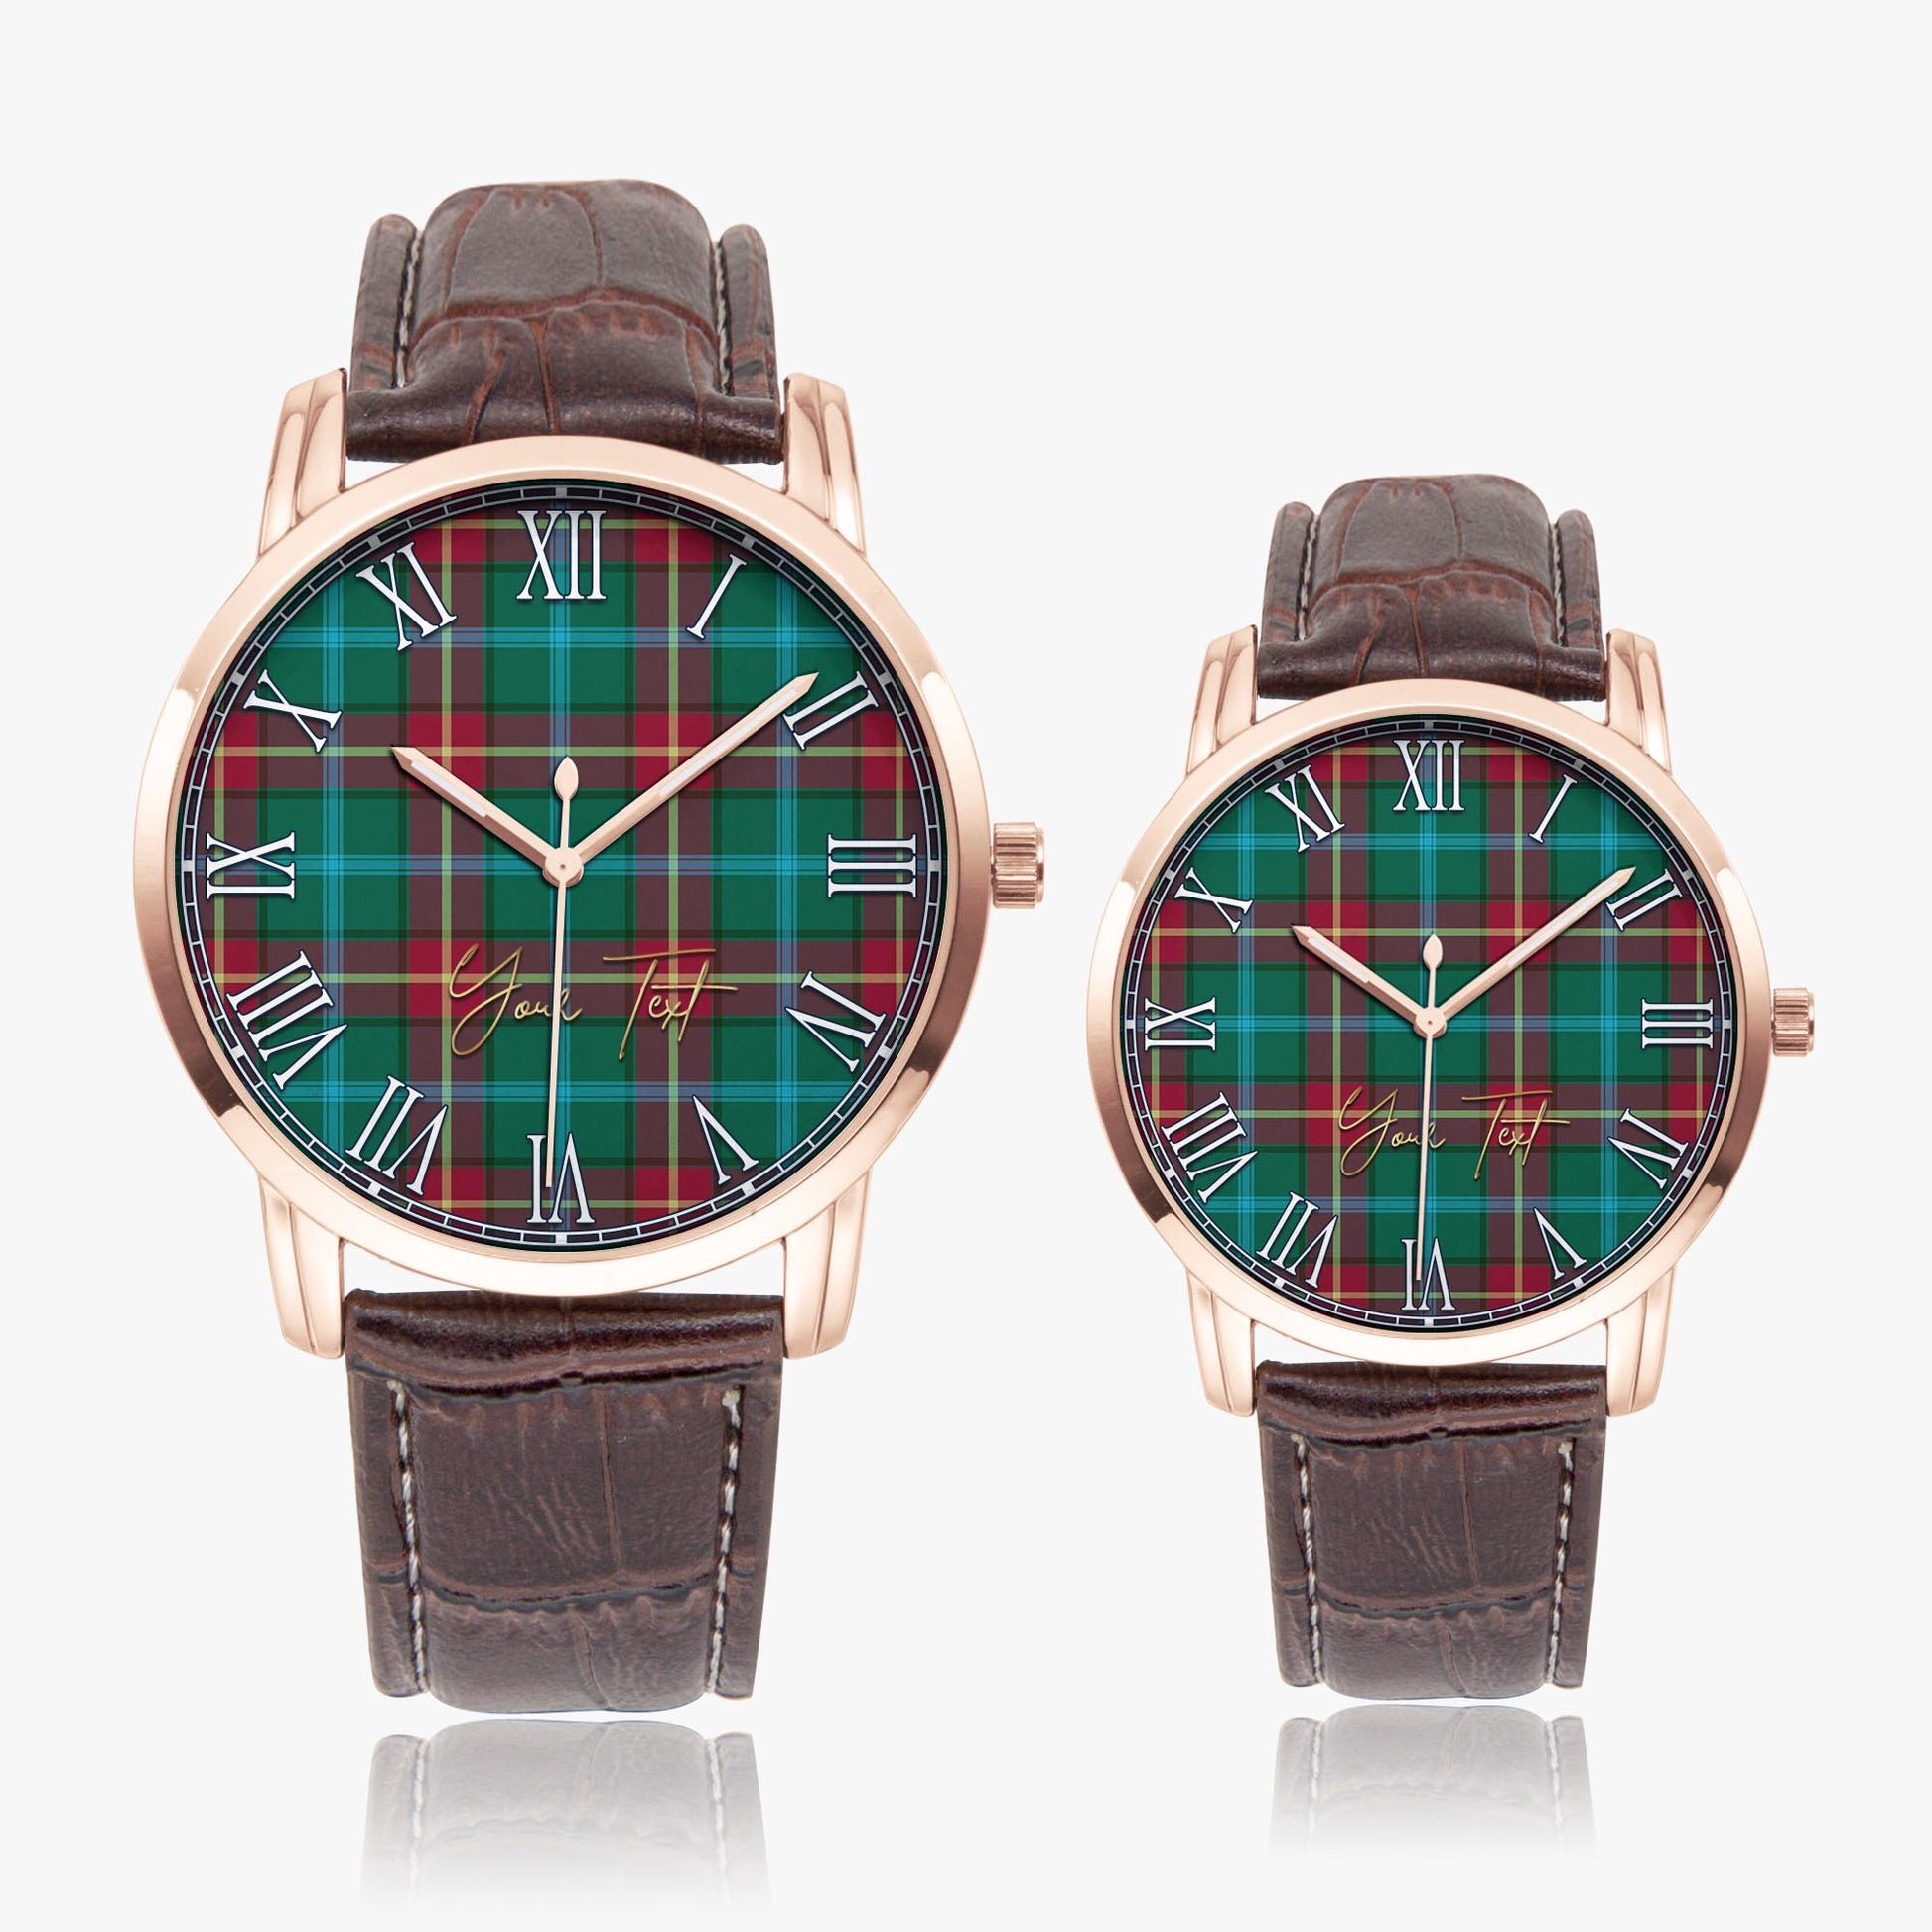 Manitoba Province Canada Tartan Personalized Your Text Leather Trap Quartz Watch Wide Type Rose Gold Case With Brown Leather Strap - Tartanvibesclothing